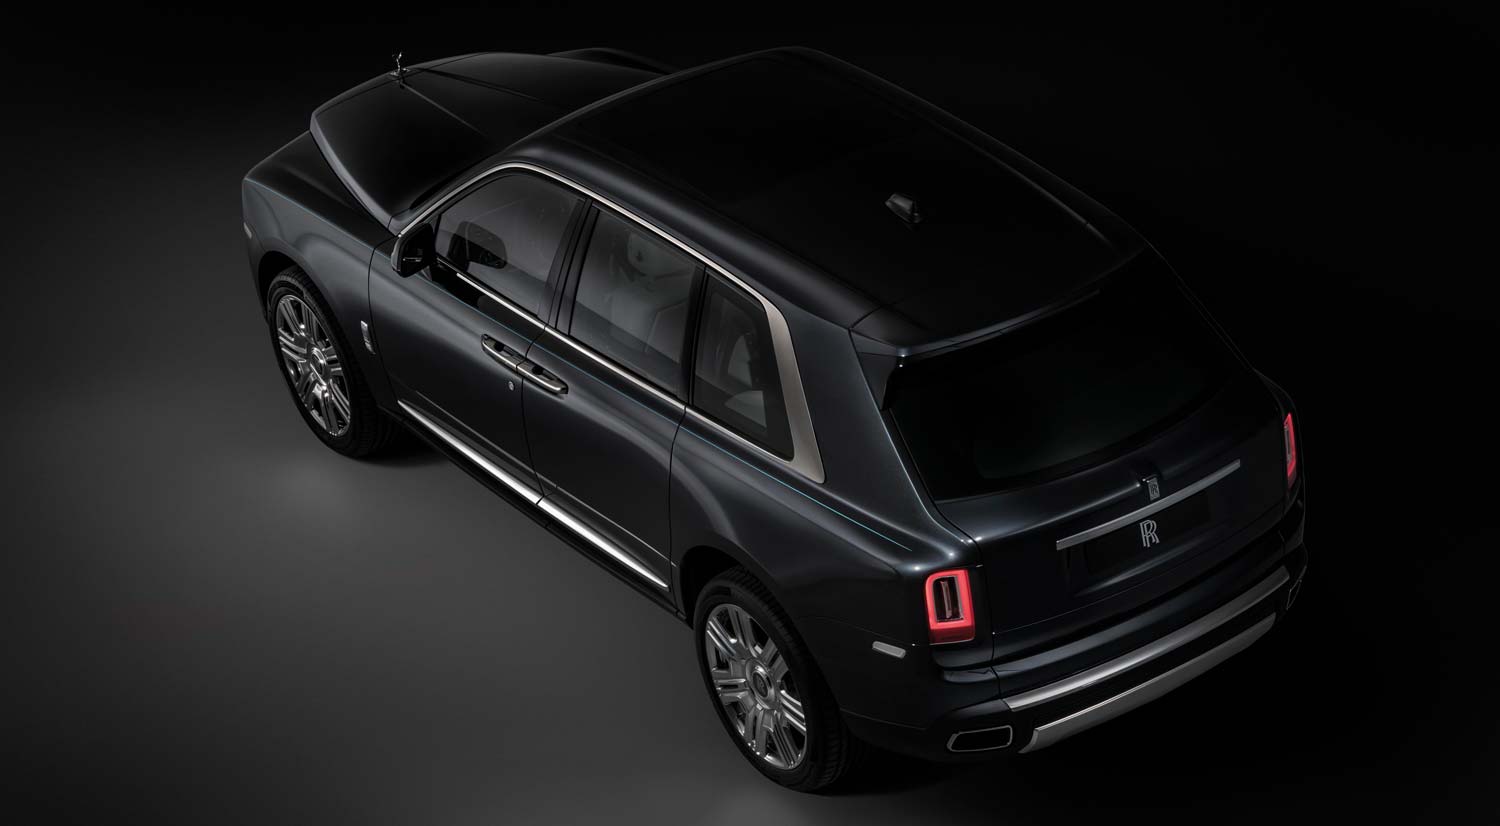 Cullinan: Quite literally the Rolls-Royce of SUVs